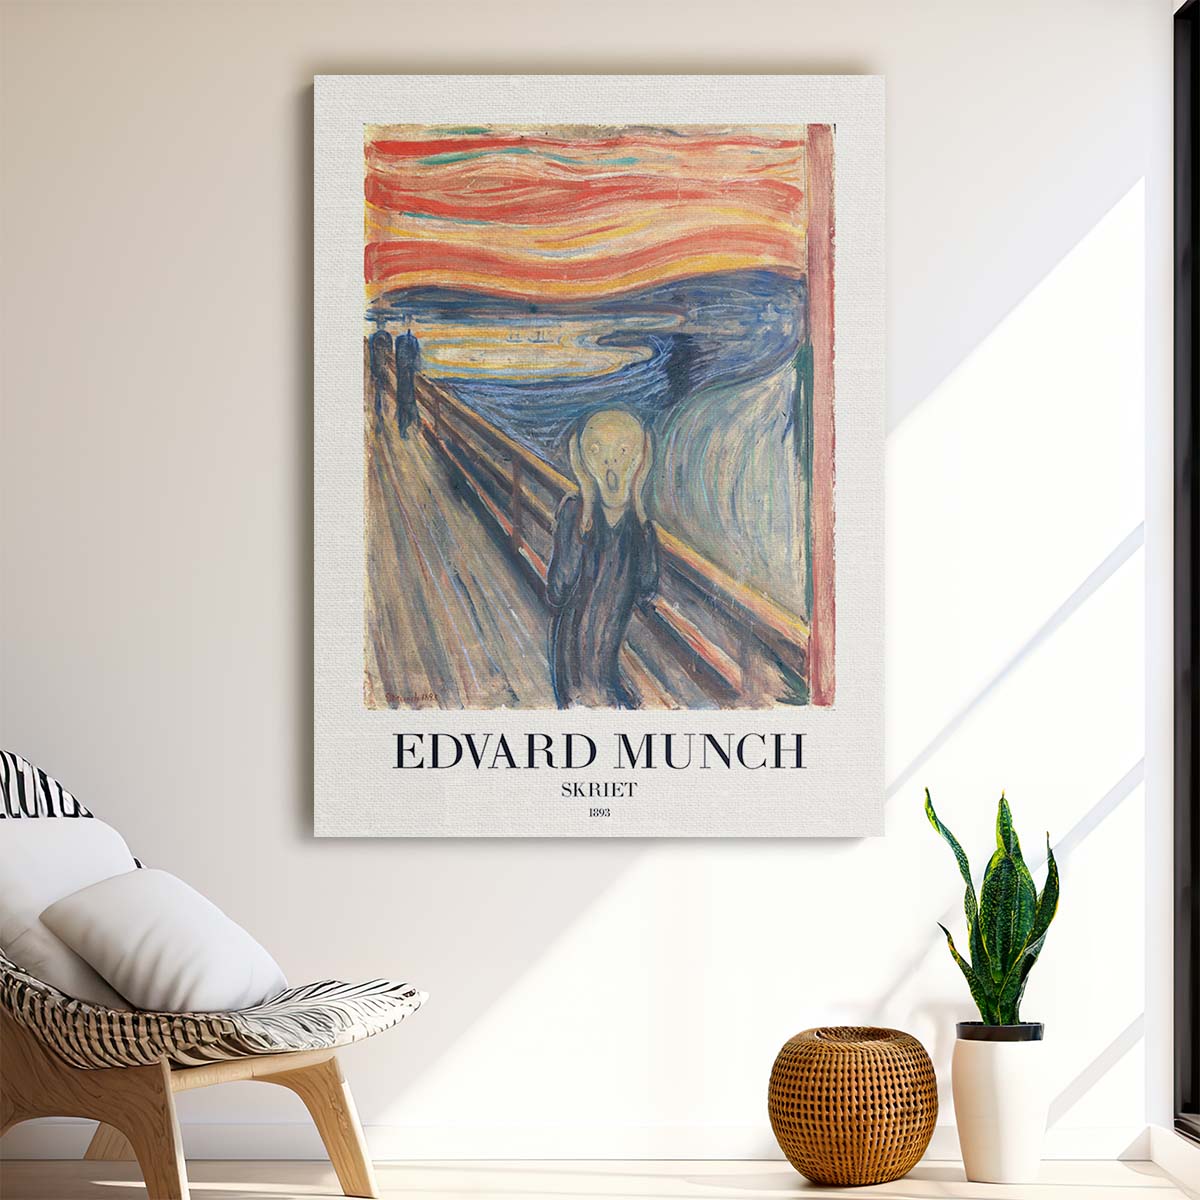 Edvard Munch's Masterpiece 'The Scream' Acrylic Painting Poster by Luxuriance Designs, made in USA